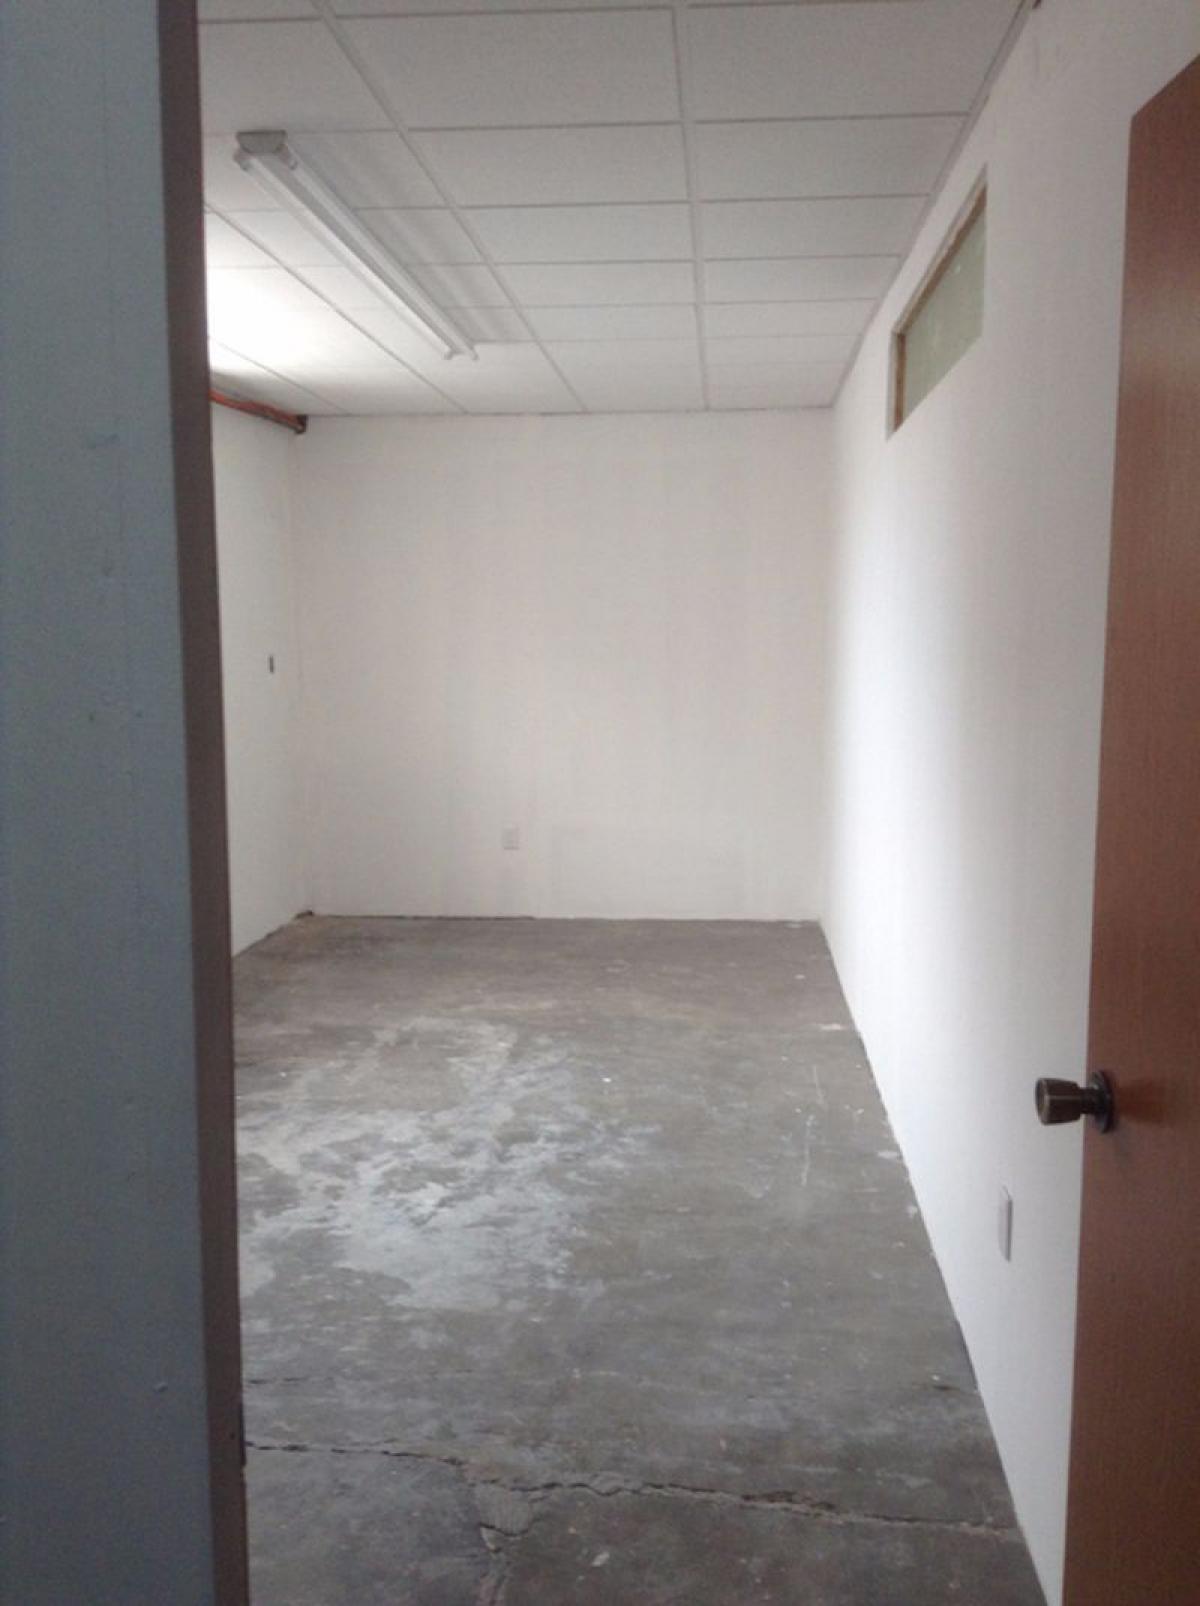 Picture of Penthouse For Sale in Mexicali, Baja California, Mexico